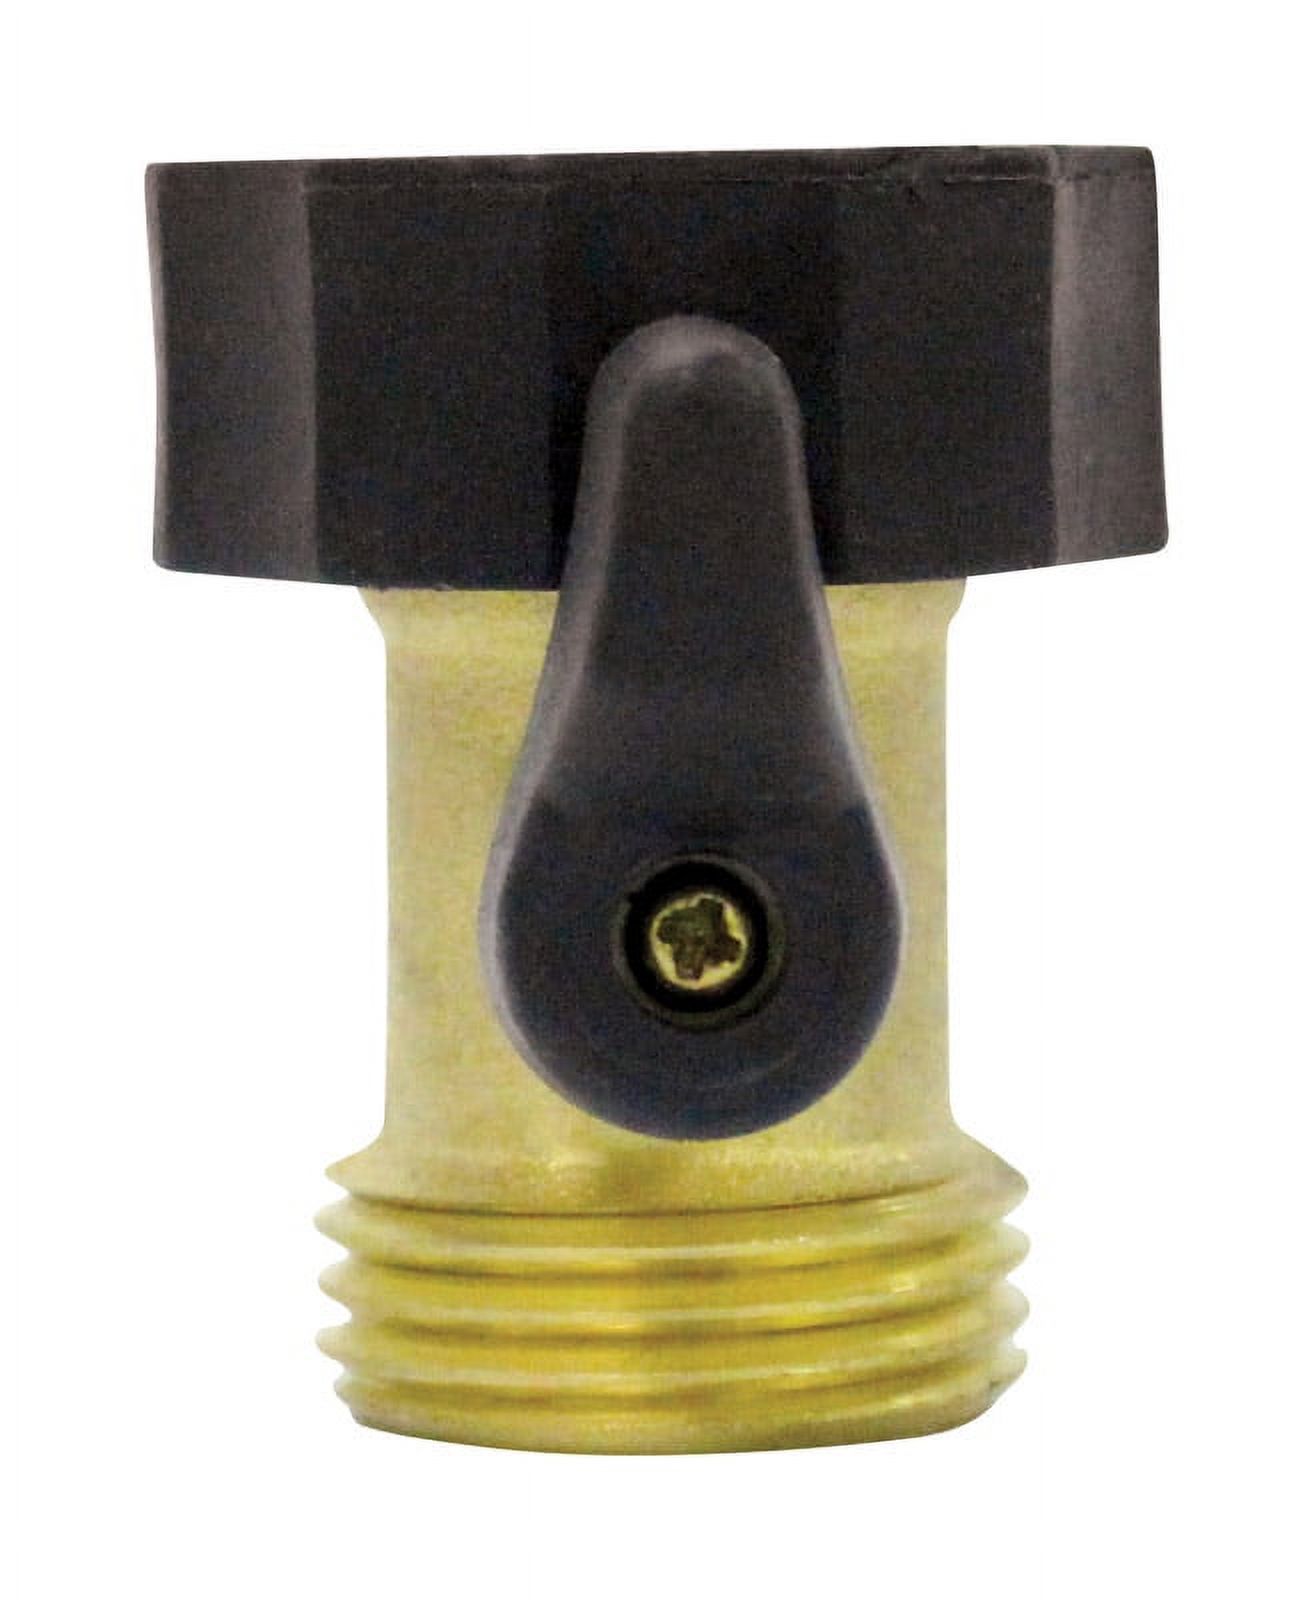 Gilmour 5/8 in. Brass Threaded Male Hose Shut-off Valve - image 1 of 2